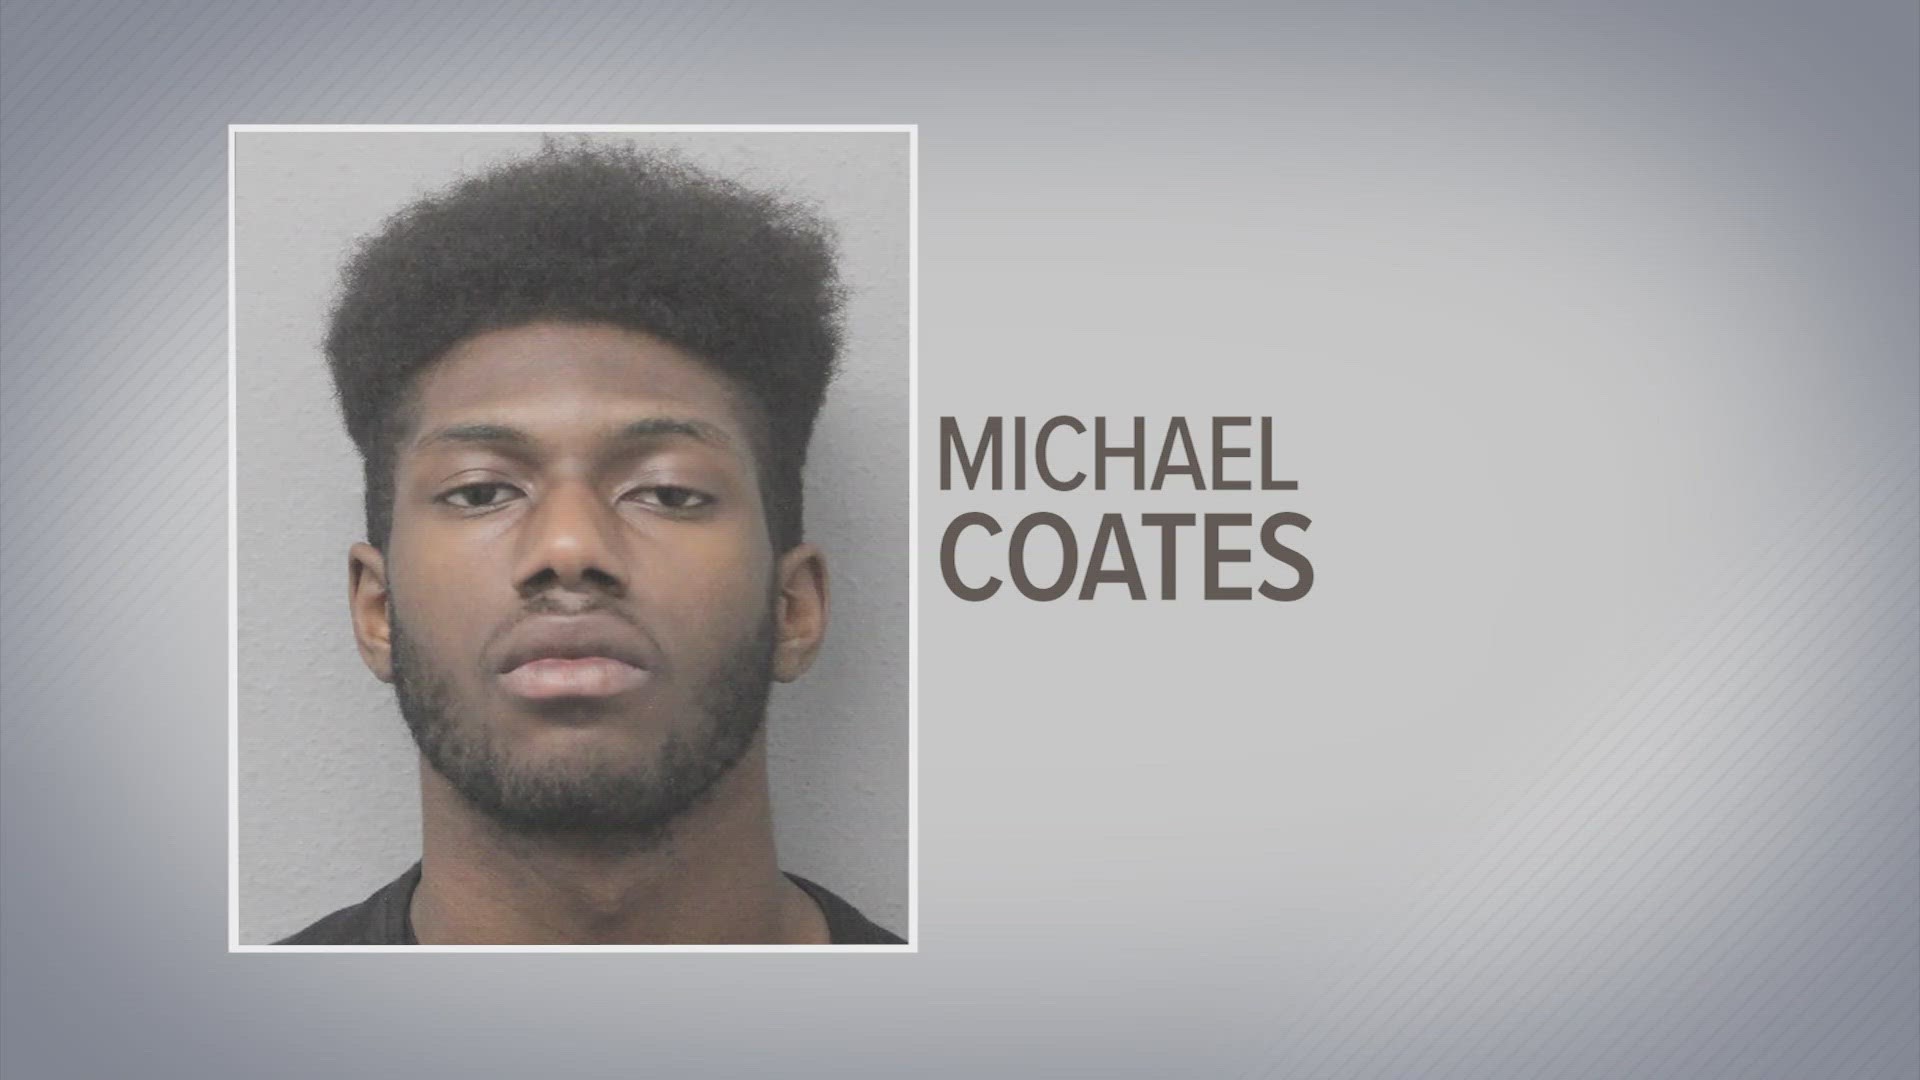 Investigators said Michael Coates, 20, is the man who robbed a couple at their west Houston home in February. He has not been caught.